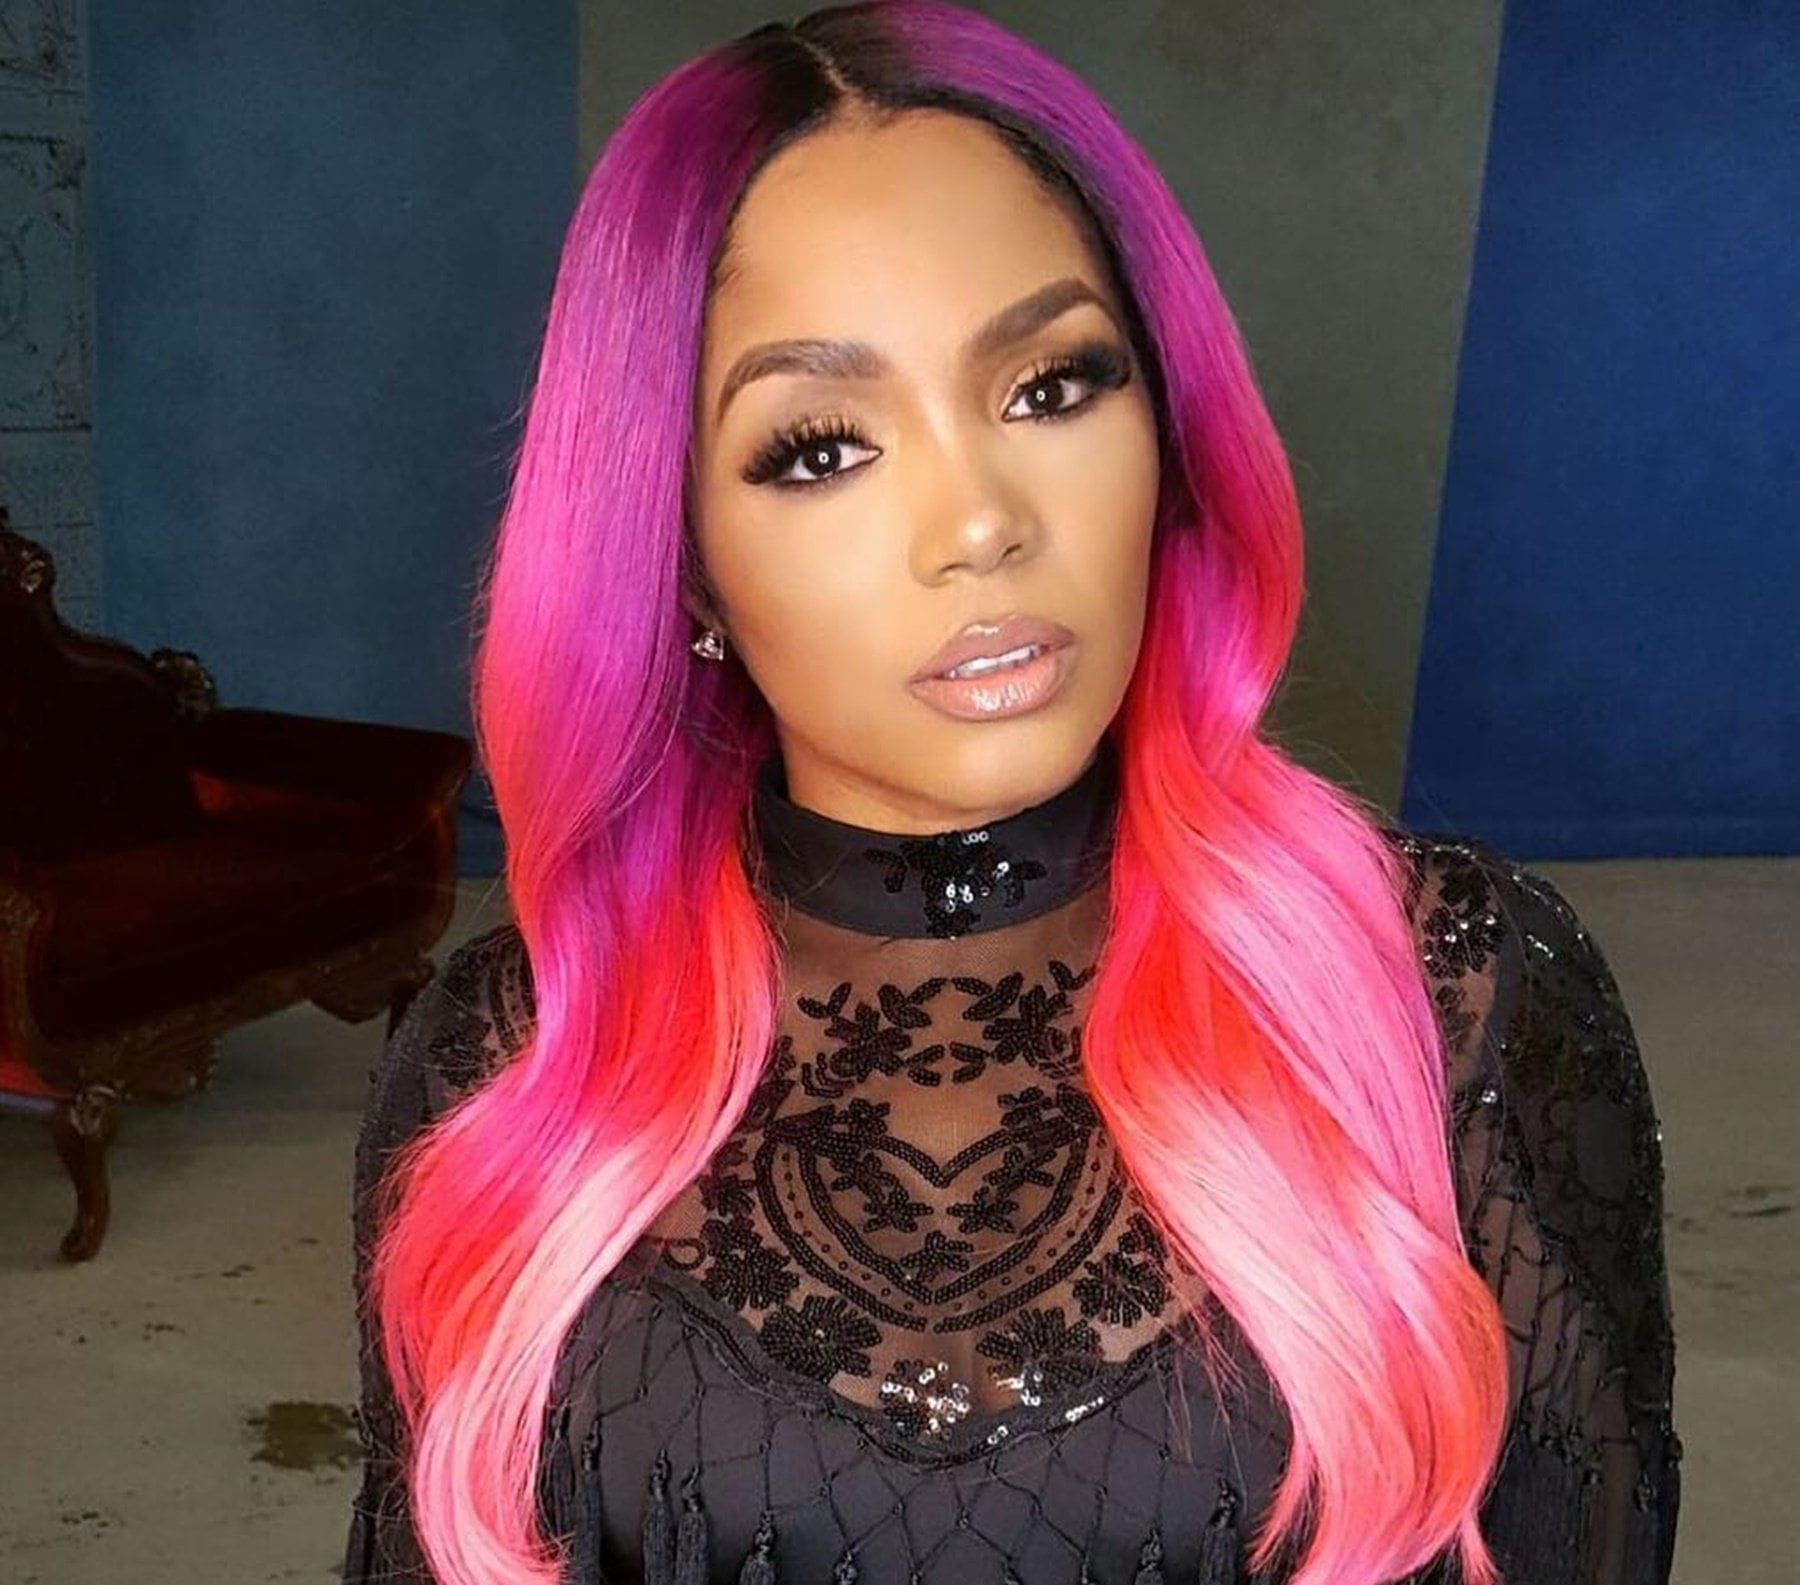 Rasheeda Frost's Fans Are Happy With The Latest Product That She's Promoting Amidst Pregnancy Rumors